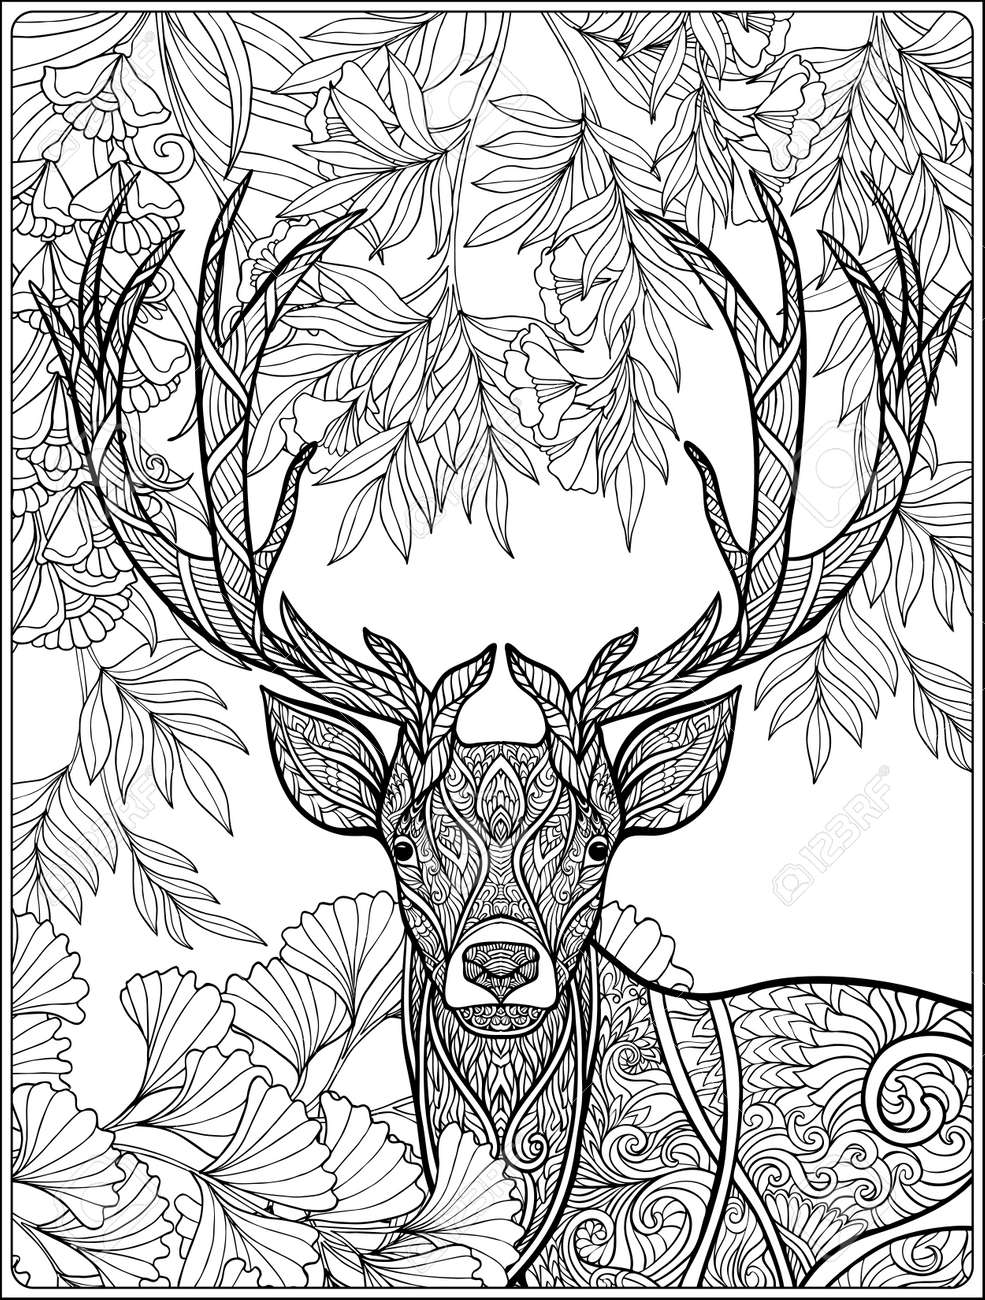 200+ Deer Coloring Pages for Adults: Explore Your Creativity 199